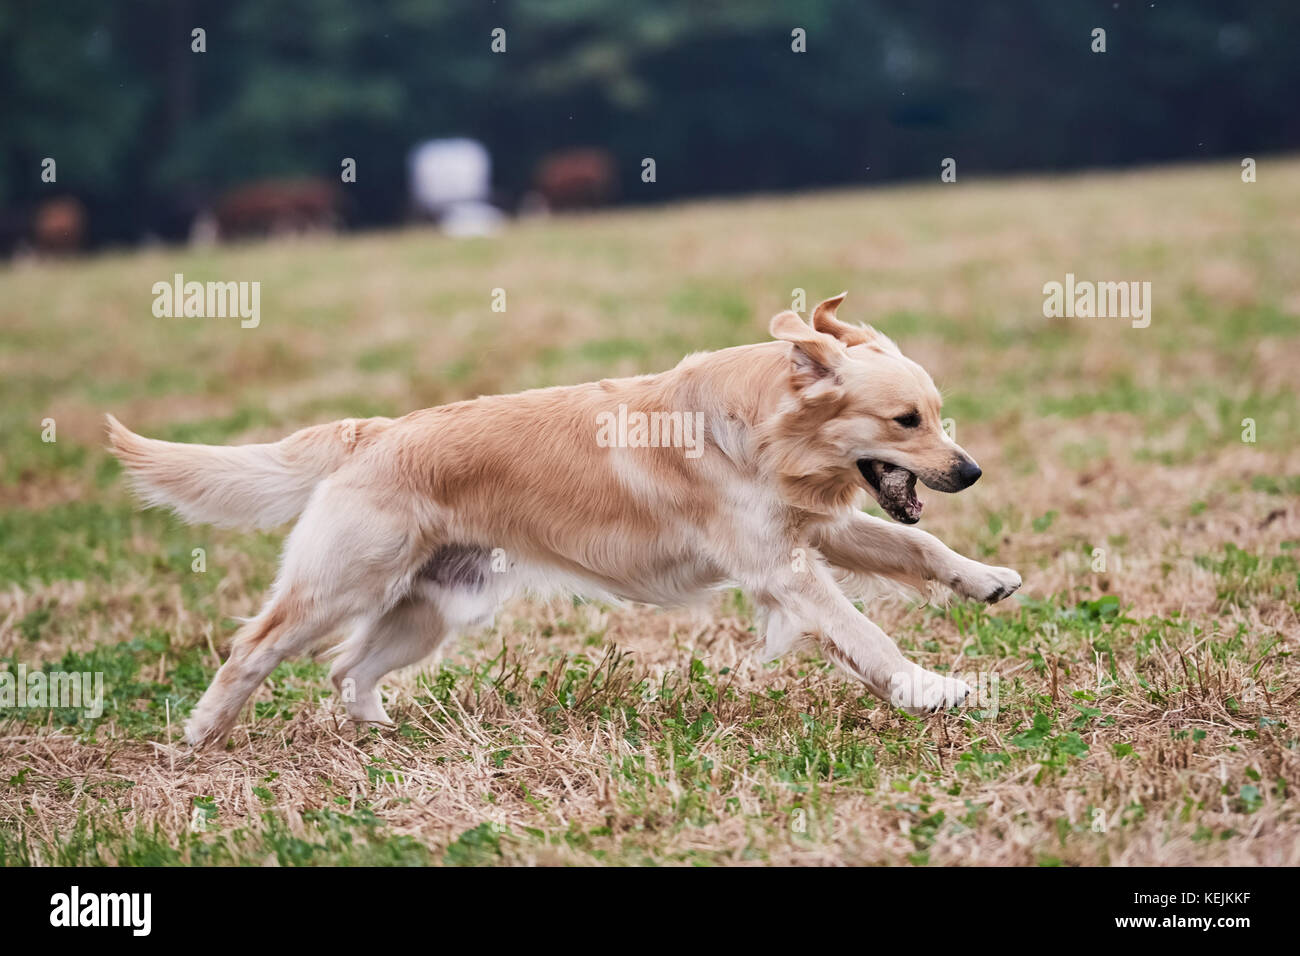 Young Purebred Golden Retriever fetching a stick Stock Photo